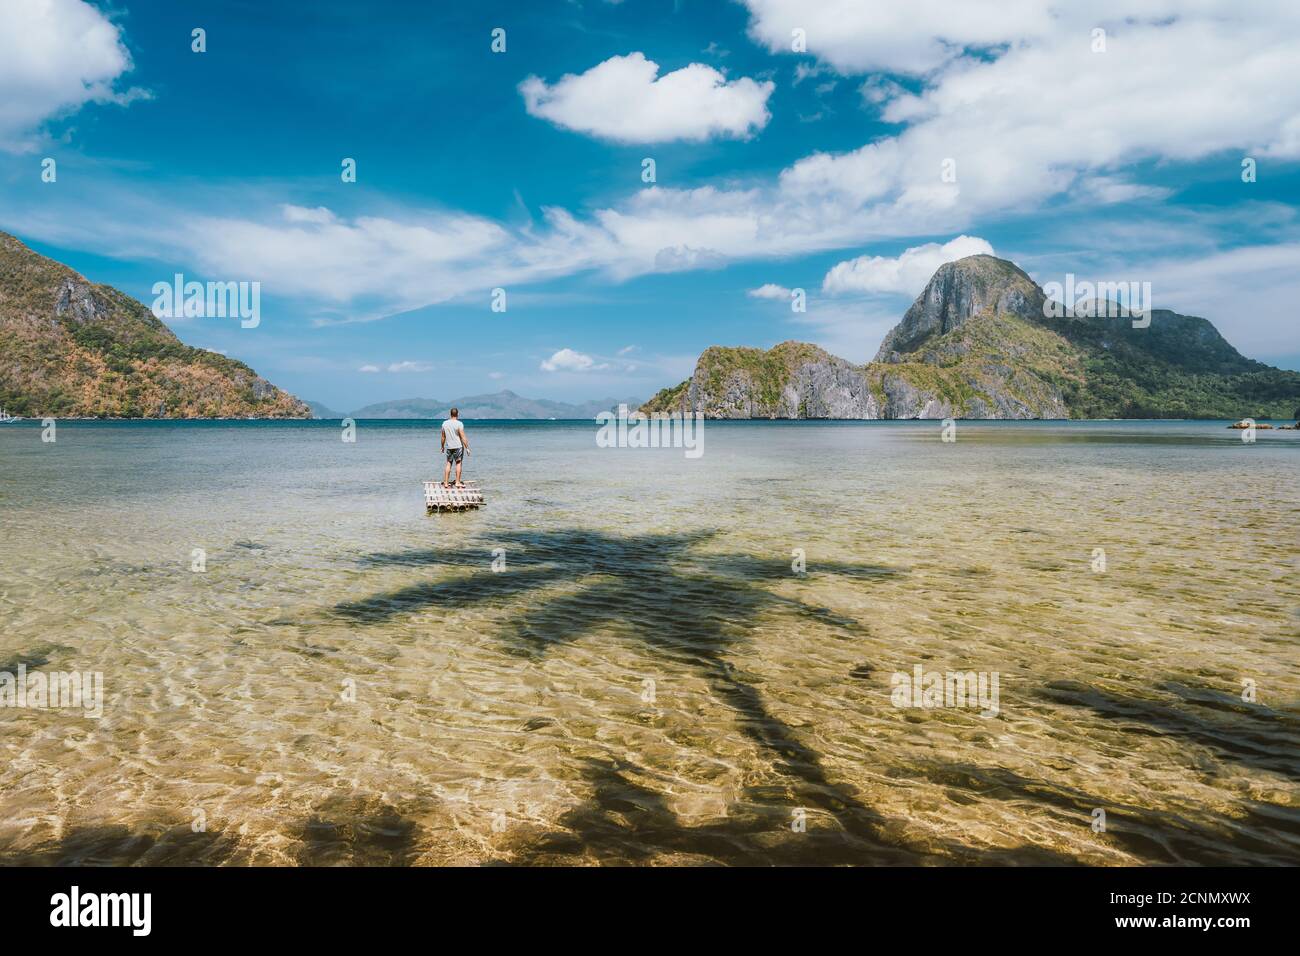 Man staying on bamboo float with impressive view of Cadlao island. Palawan, Philippines. Holiday vacation concept. Stock Photo